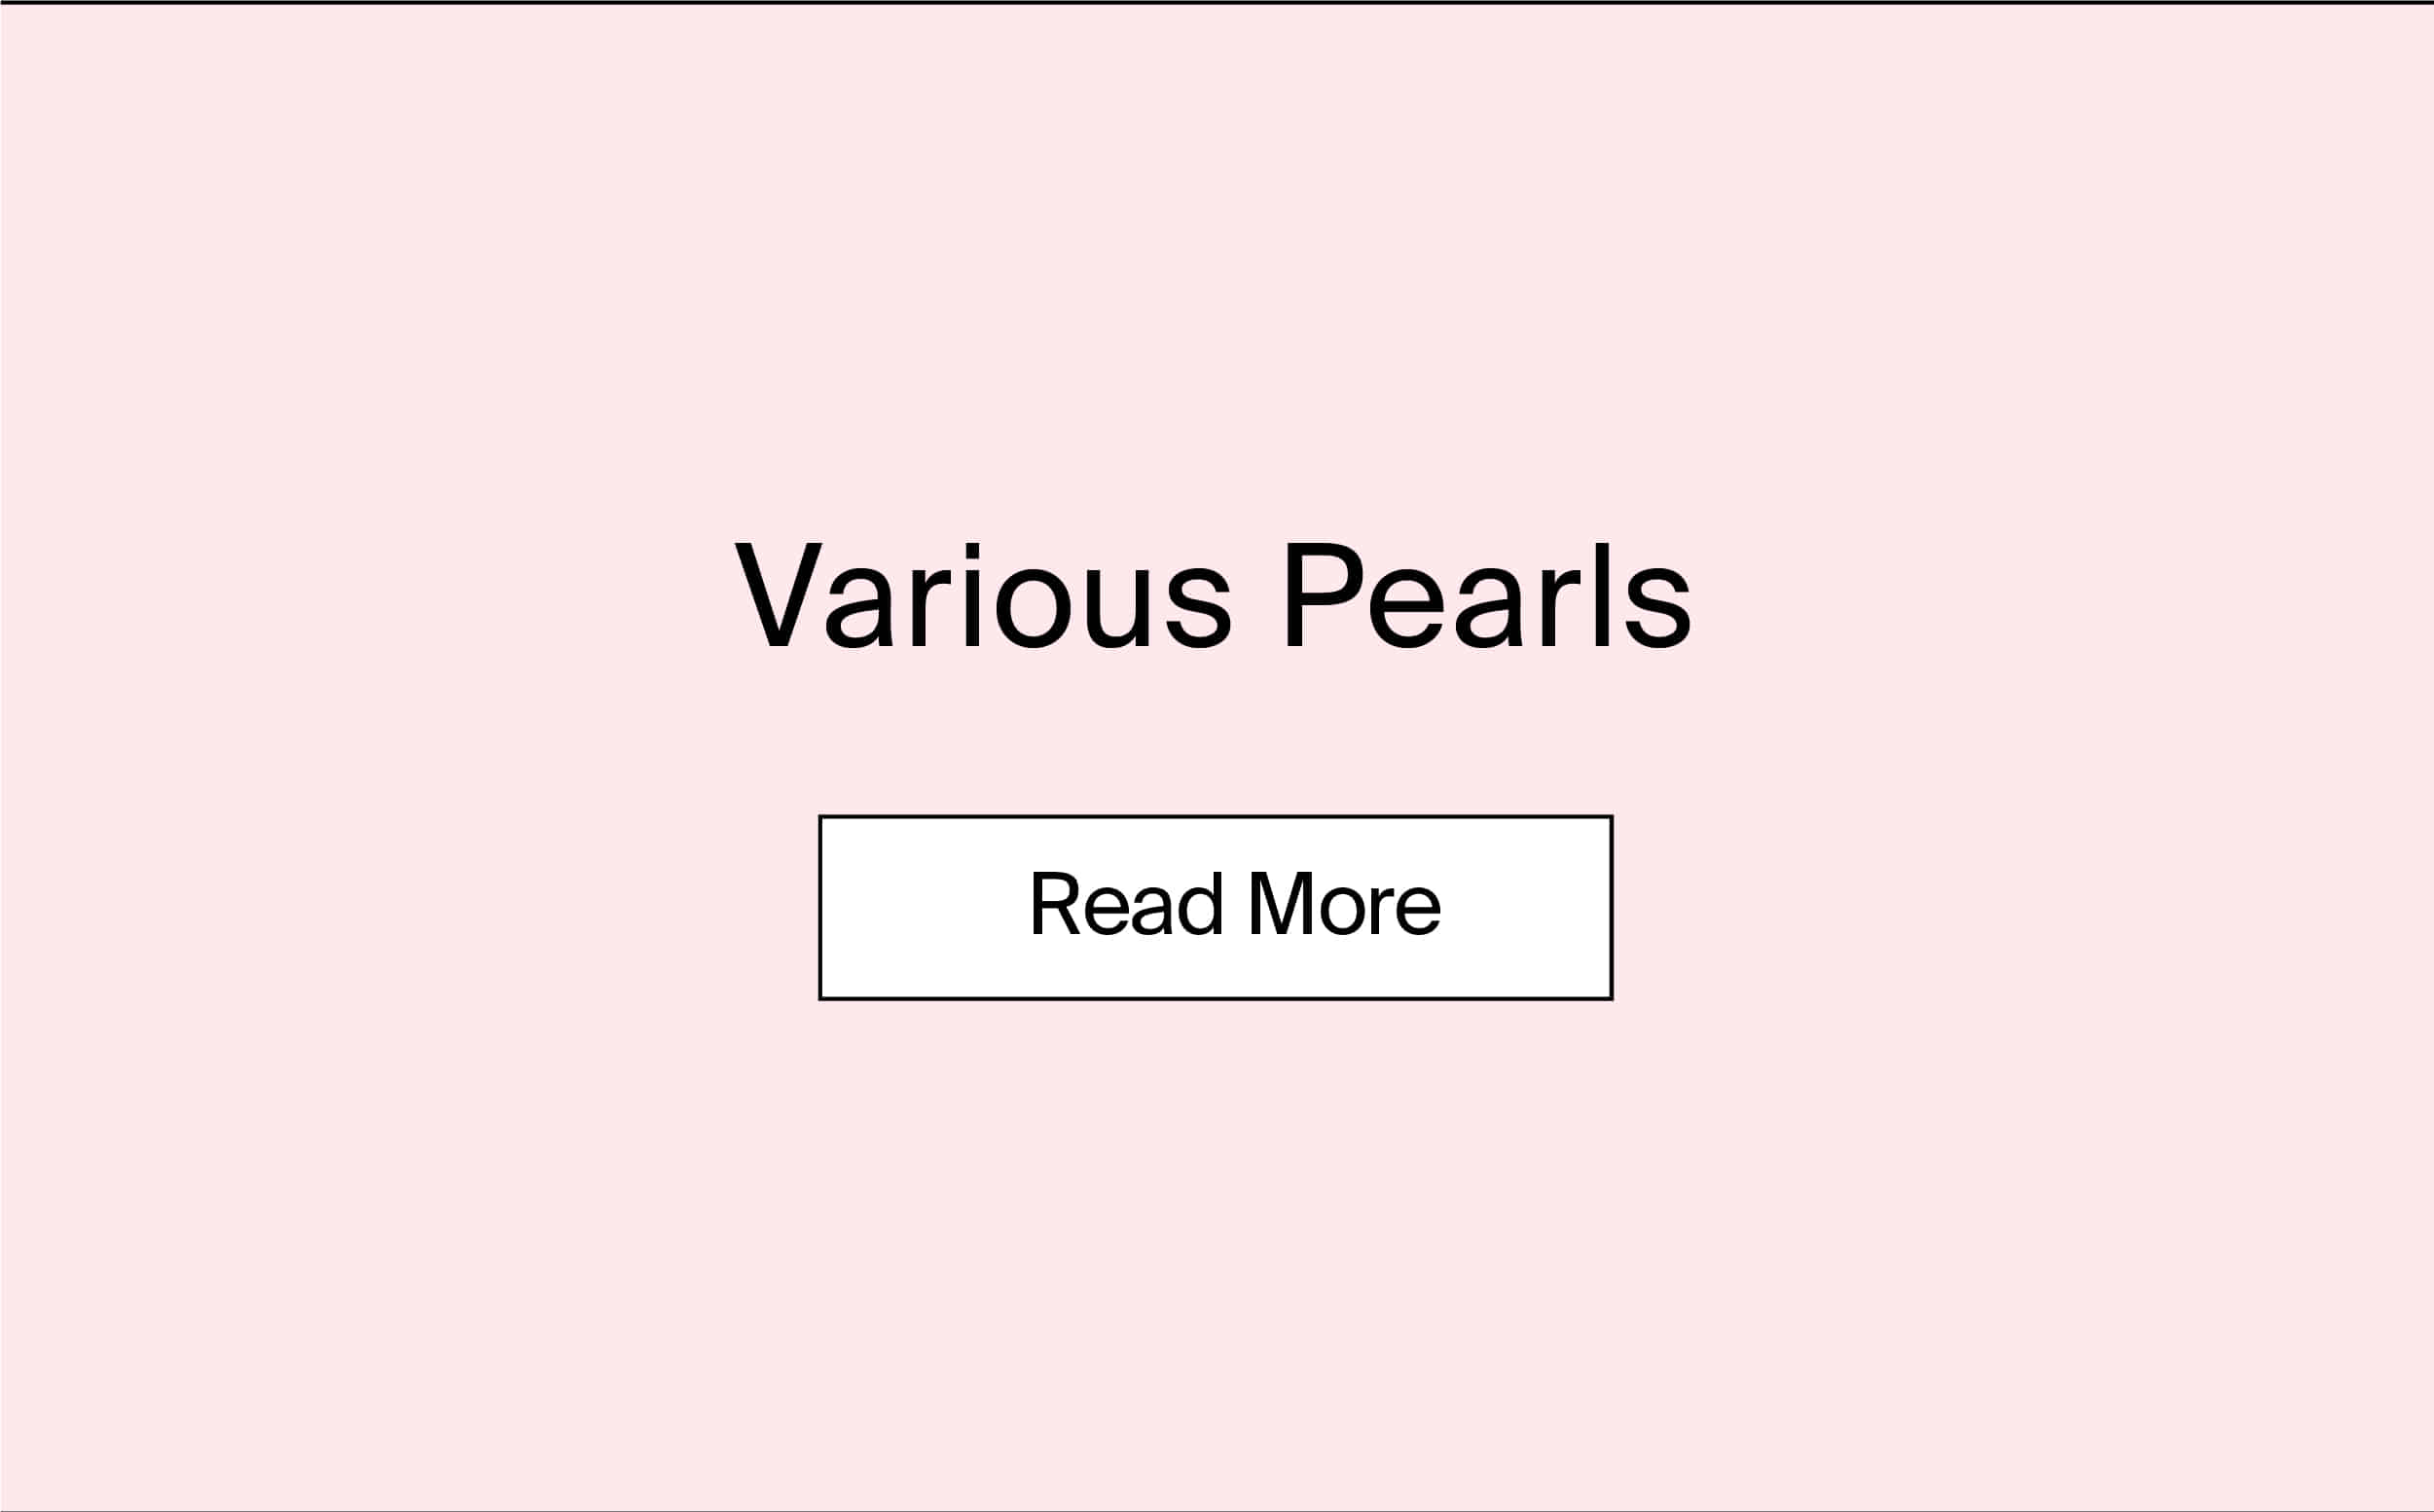 pearl numbering about